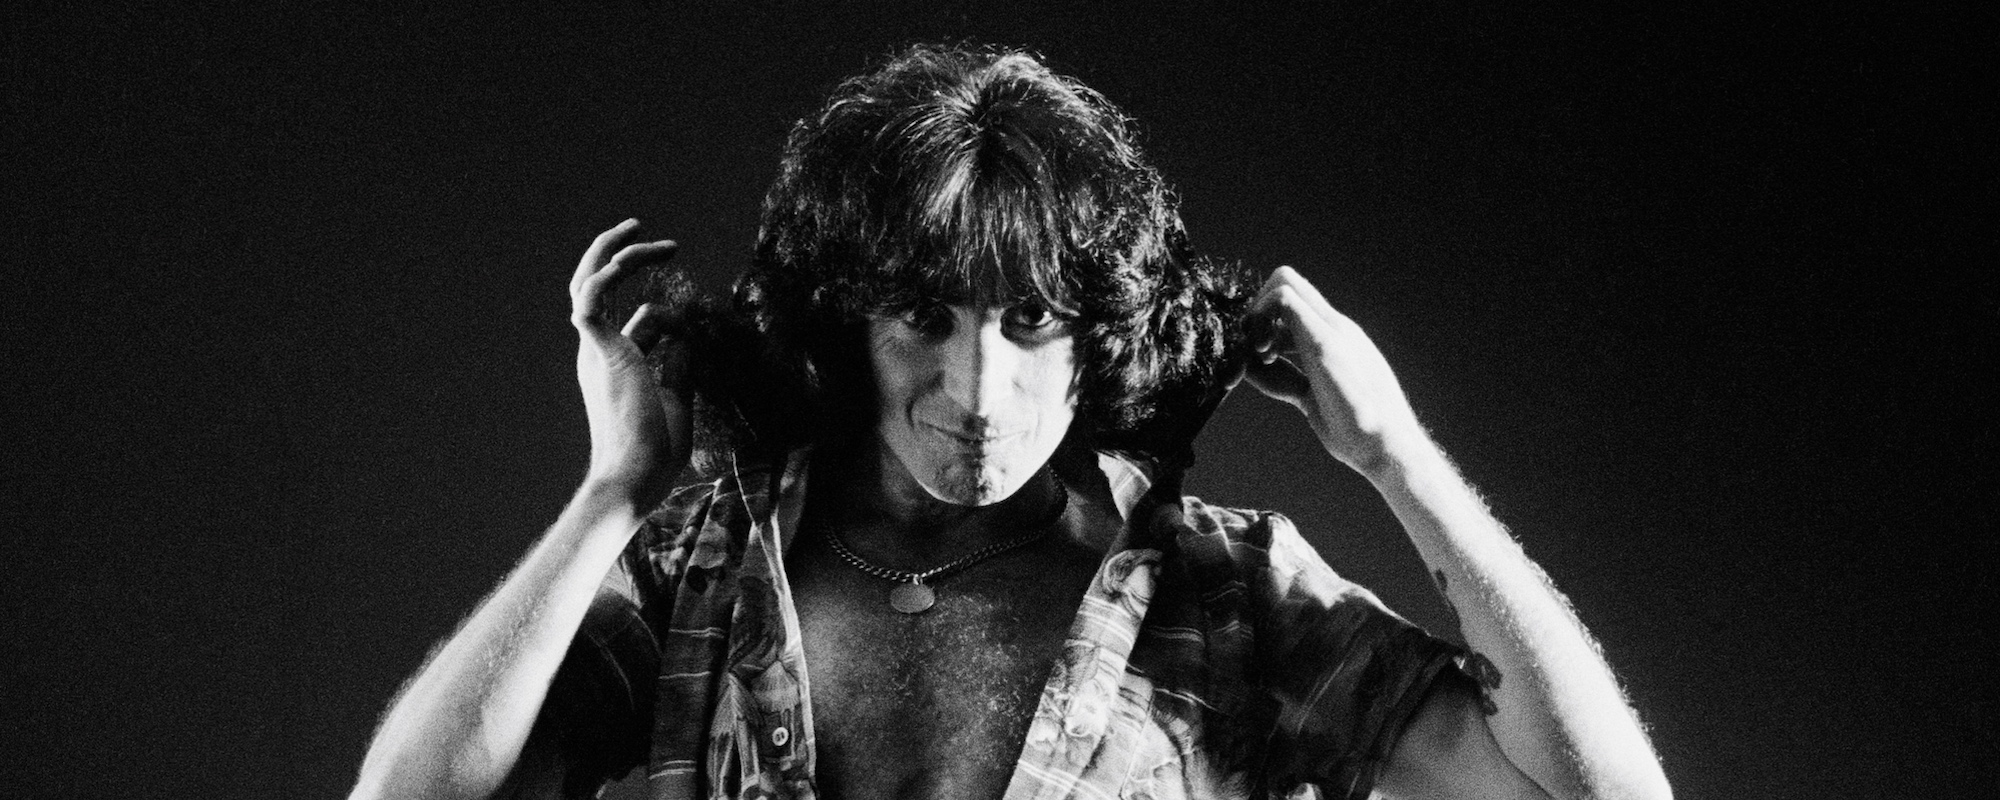 6 Songs You Didn’t Know Bon Scott Wrote Before His AC/DC Days